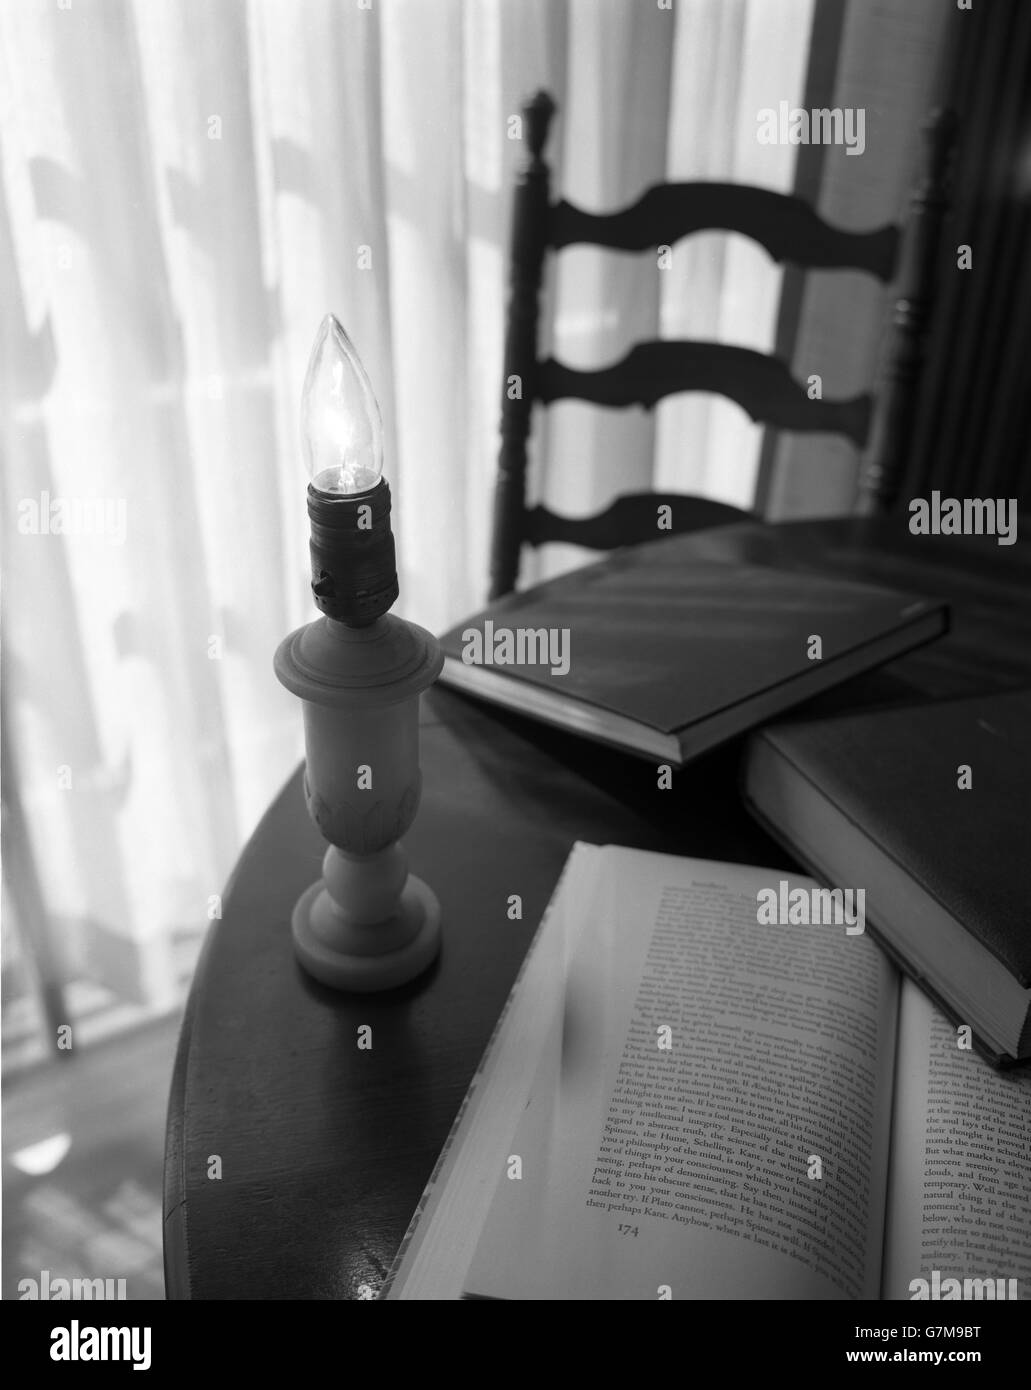 Lamp with no shade with a flame bulb on a table. One open book and two closed books are also on the table. Stock Photo